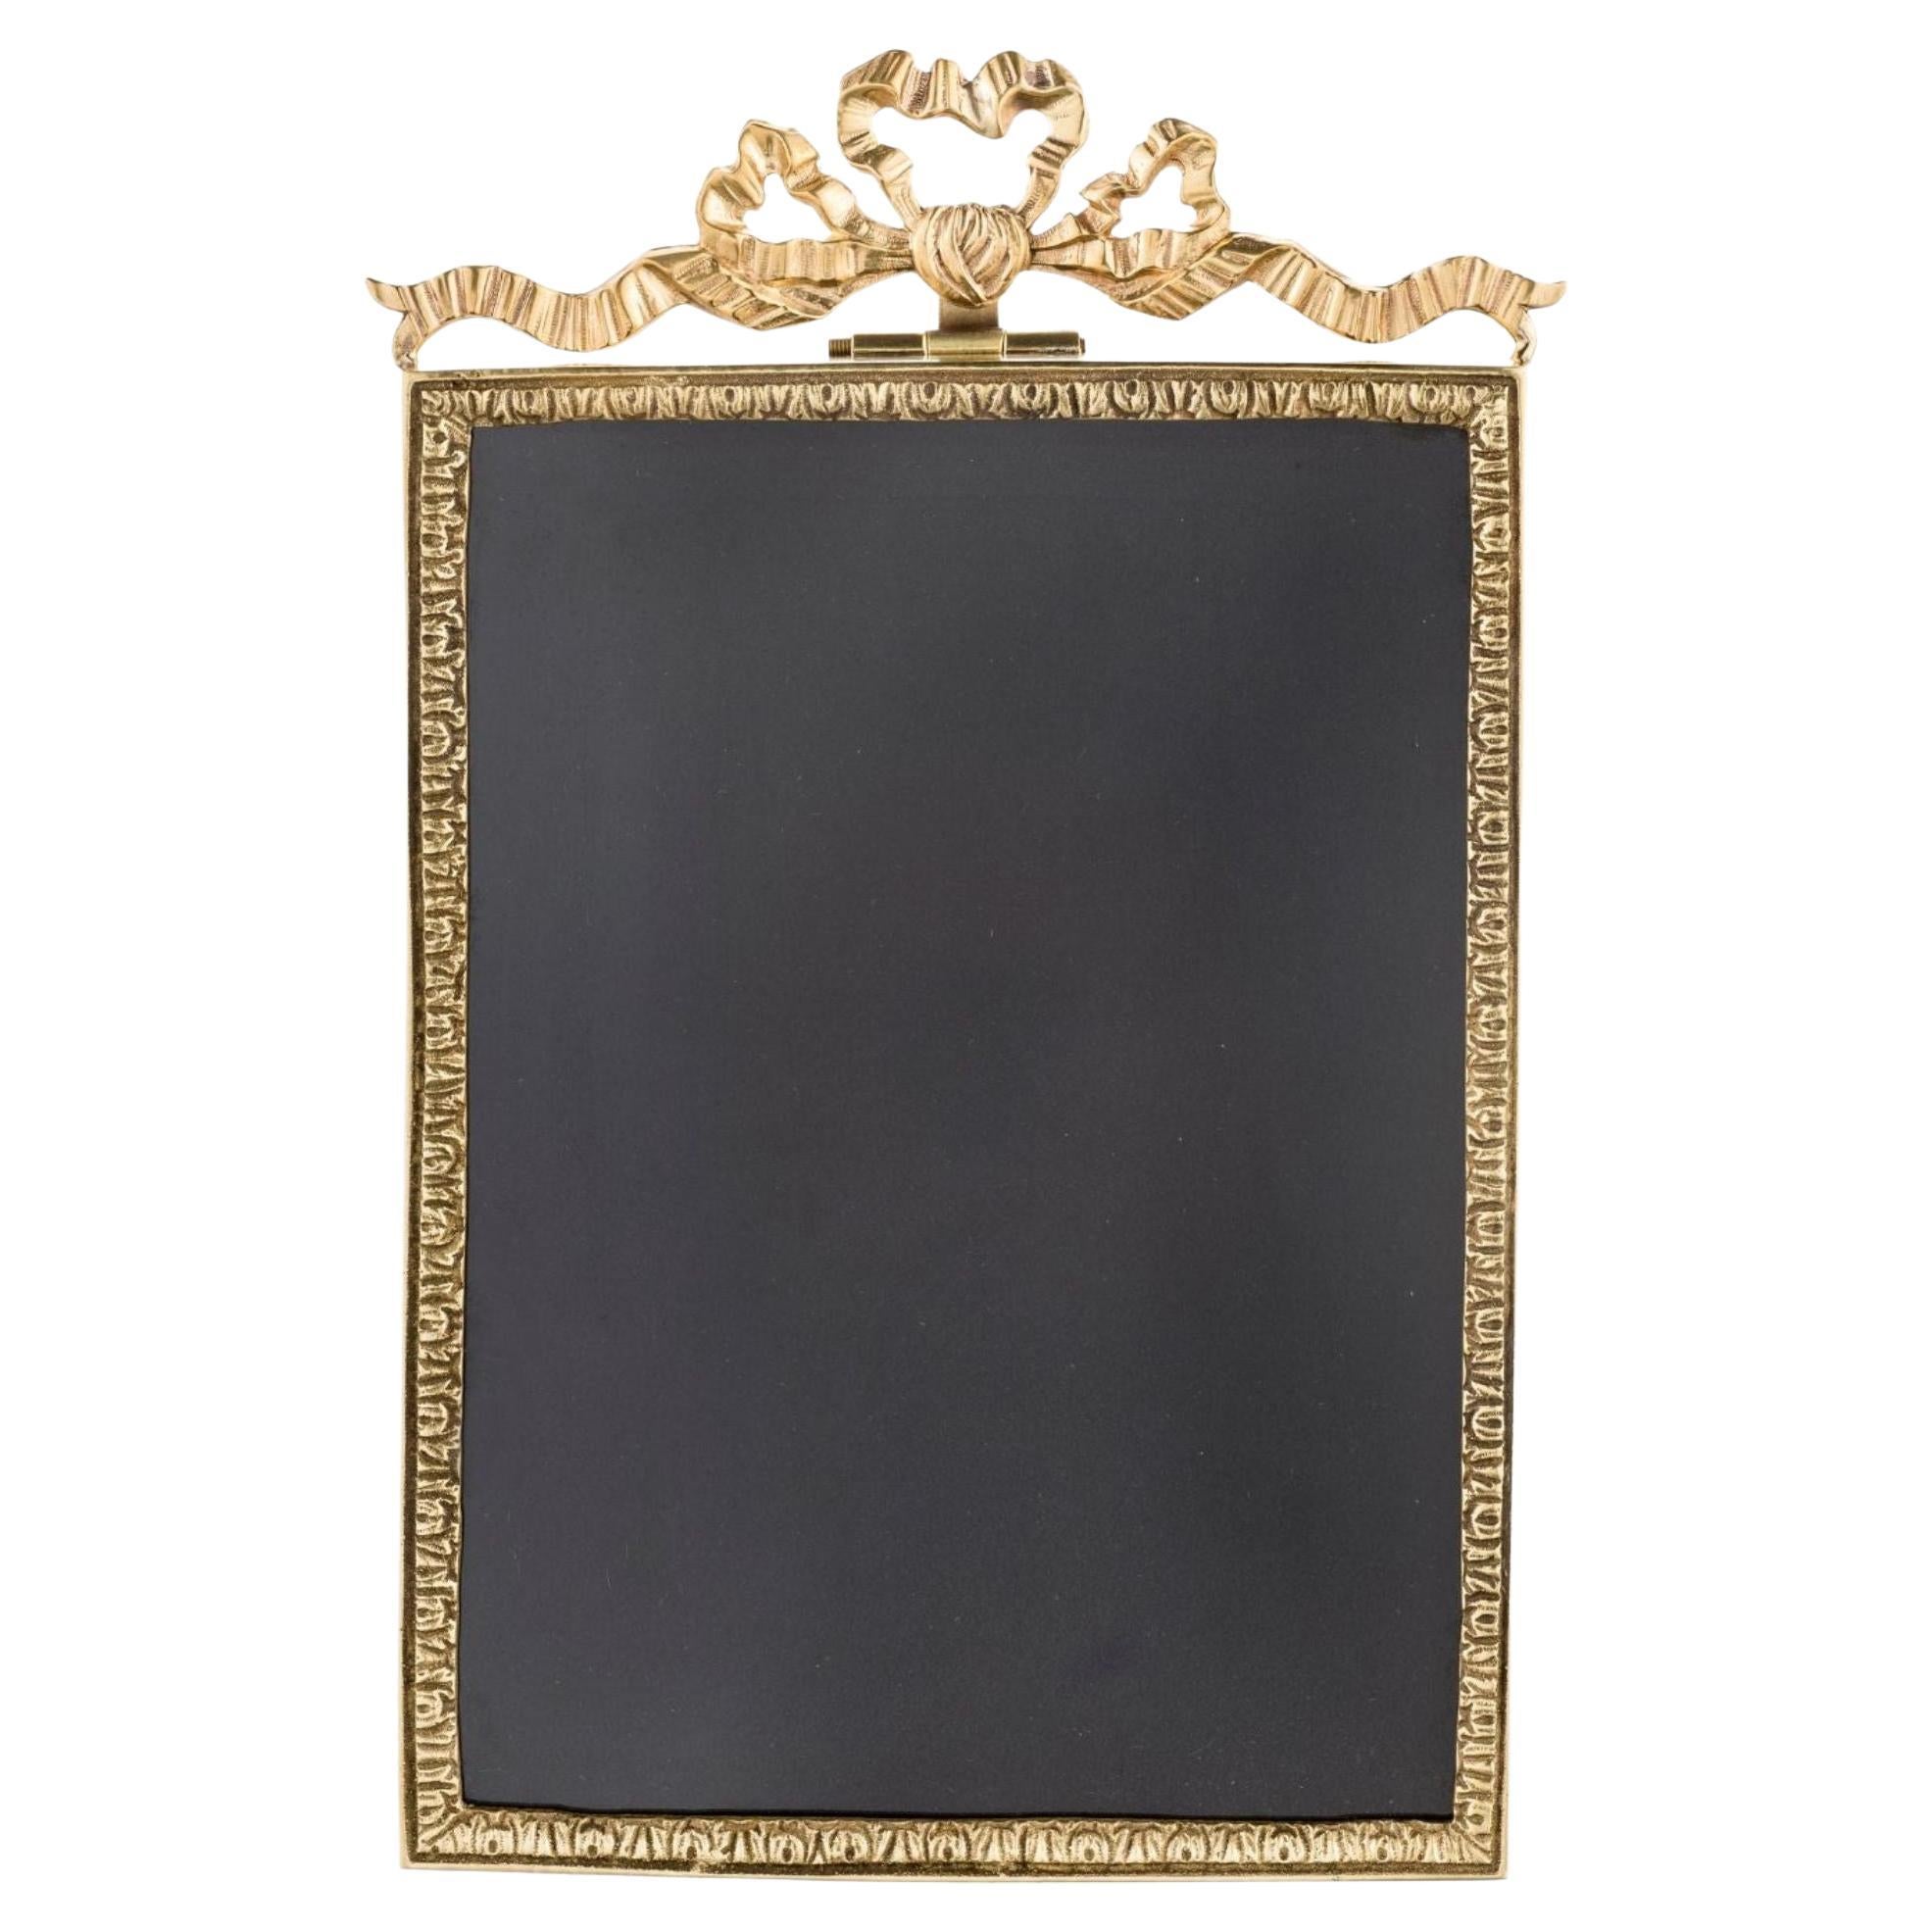 Sissi Brass Frame with Ribbon